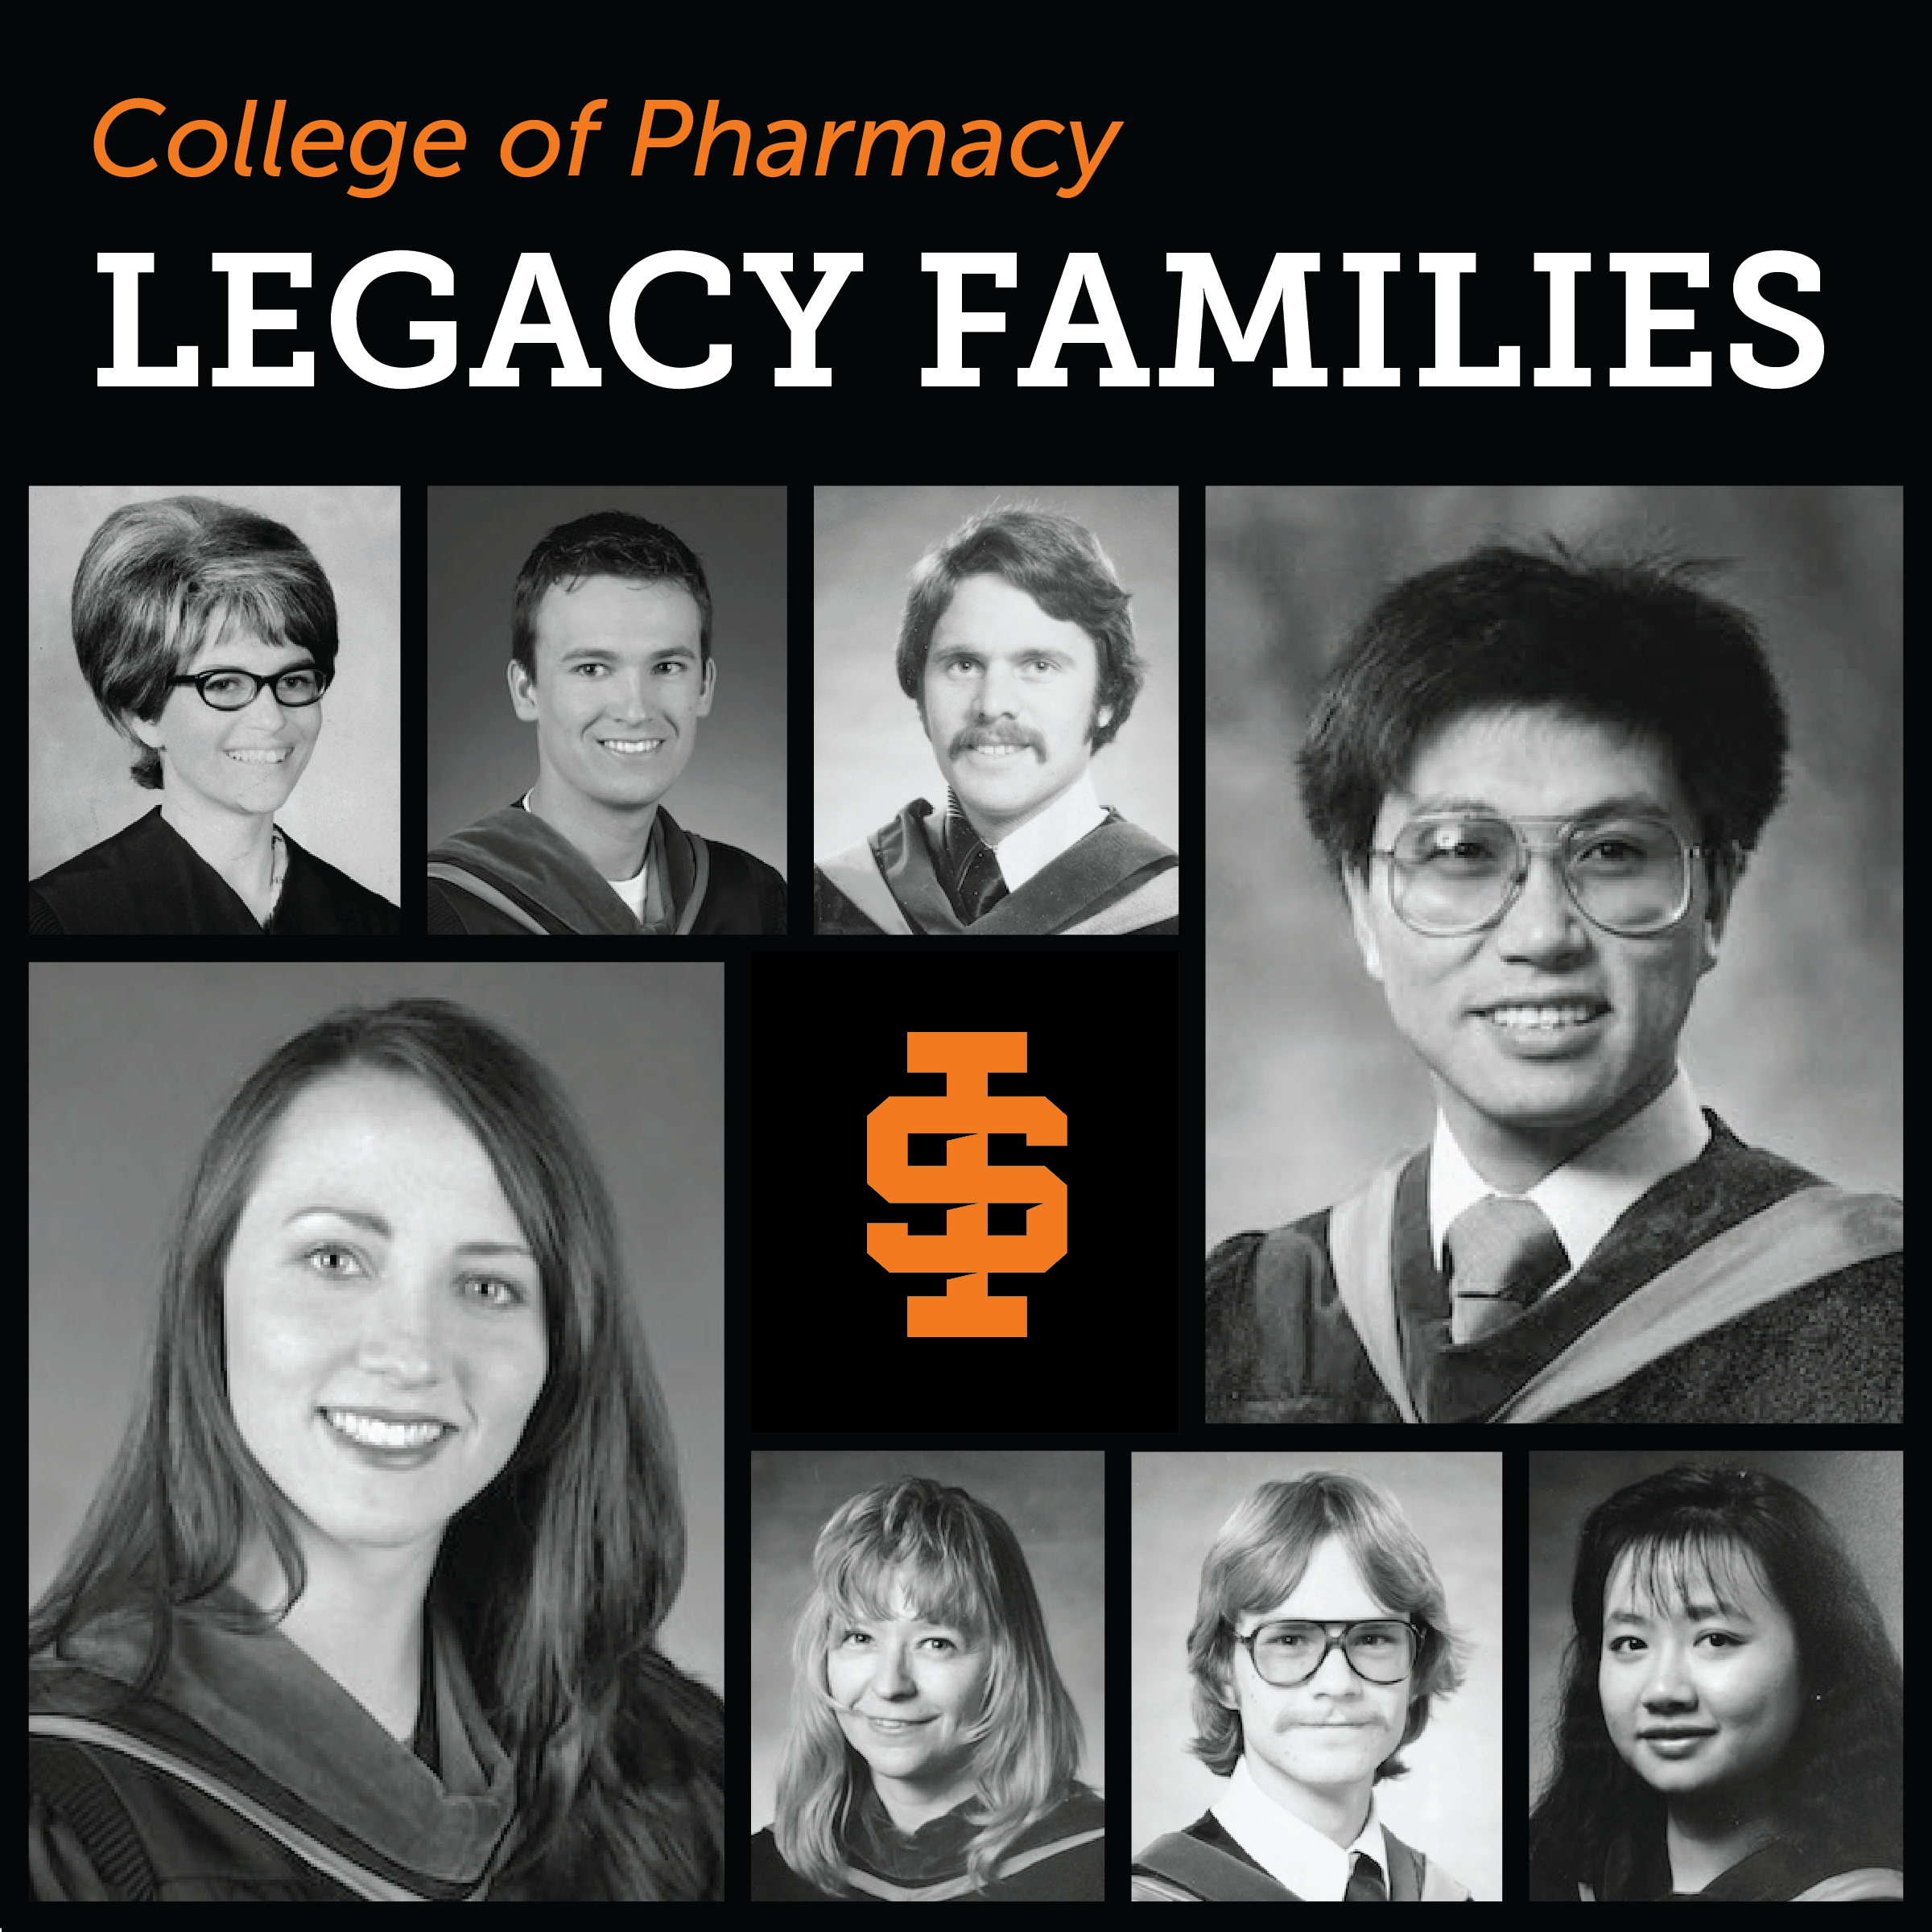 College of Pharmacy Legacy Families. Images of past COP graduates that have multiple family members who have also graduated from the COP program.